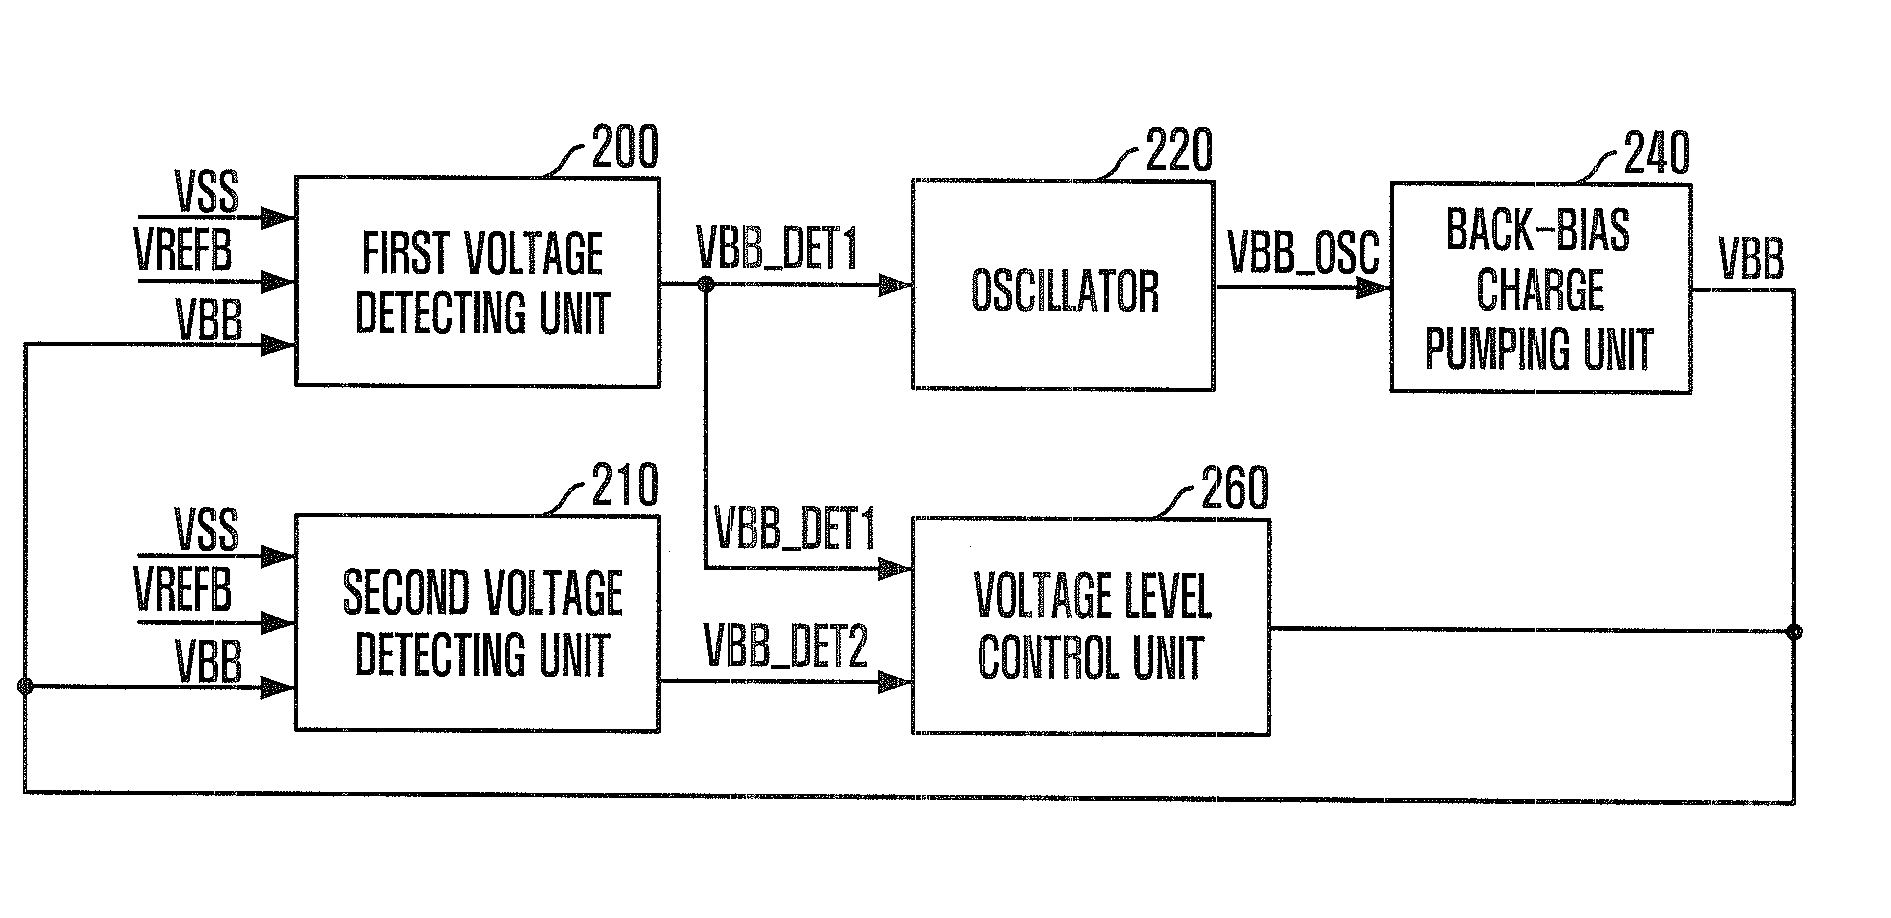 Semiconductor memory device having back-bias voltage in stable range